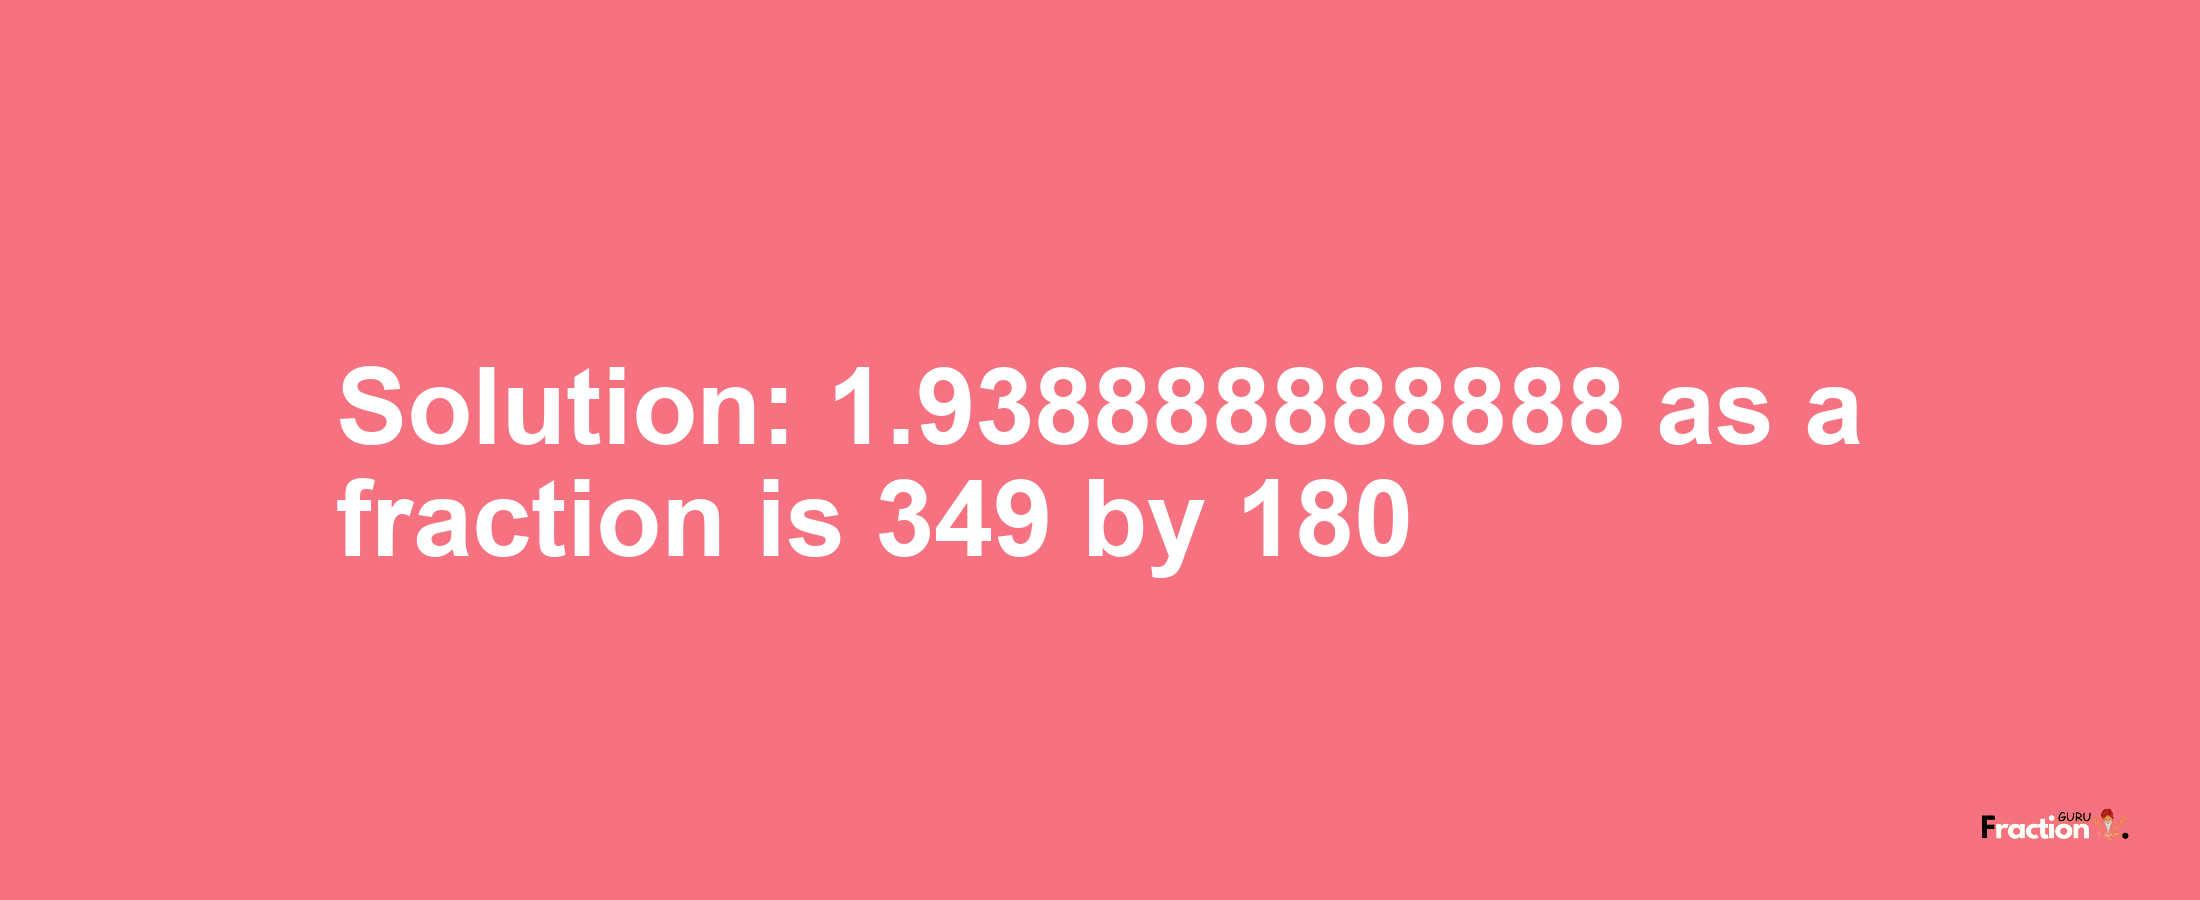 Solution:1.938888888888 as a fraction is 349/180